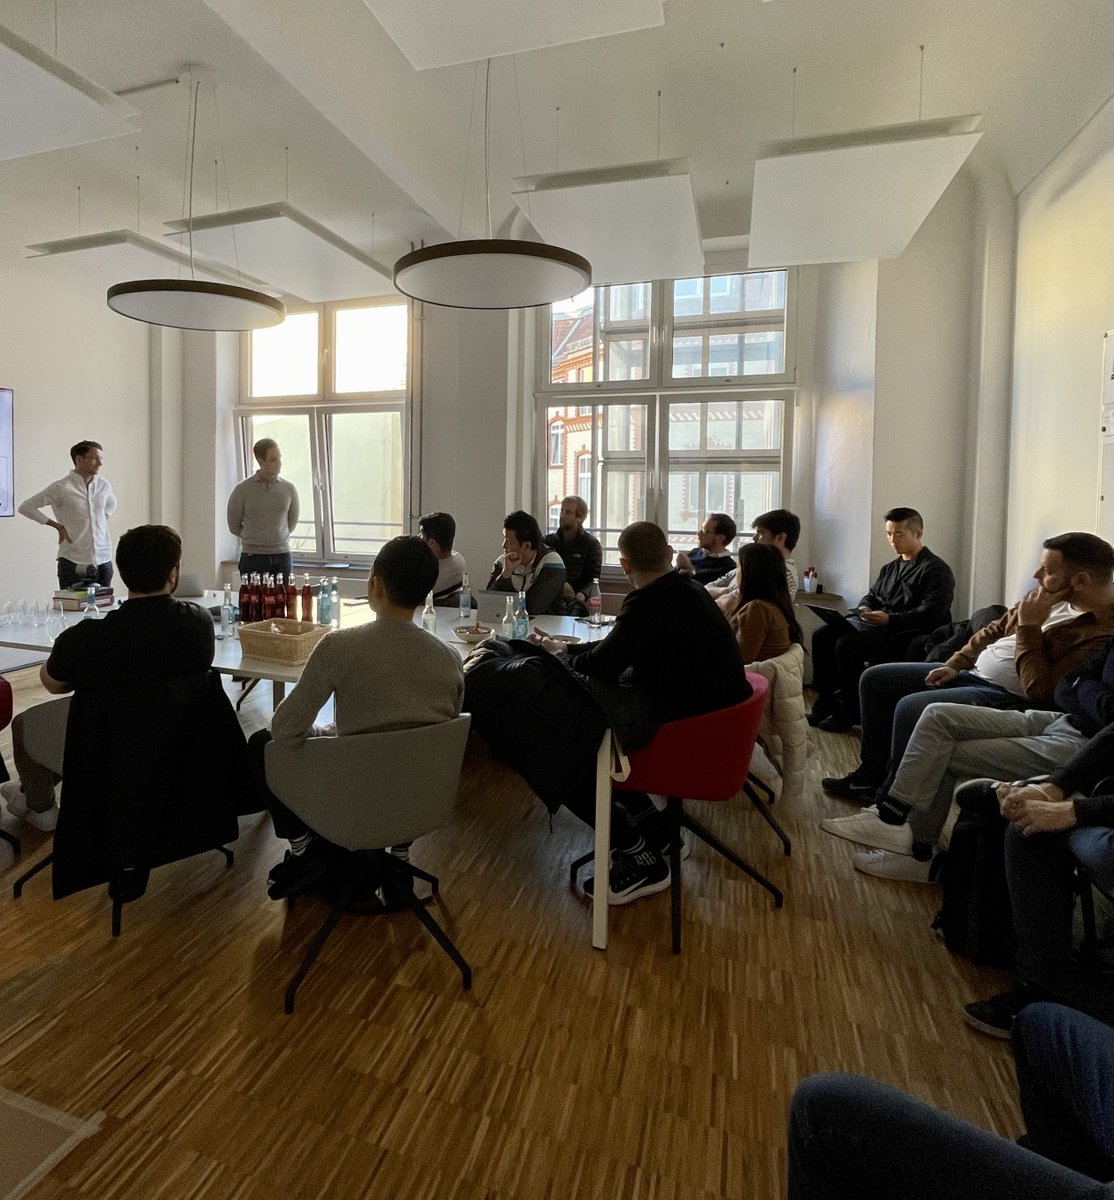 Redstone x ESADE On Thursday we had 17 MBA Students from the @ESADE at our office in Berlin. Ben, @MickaelBell90 and @SamuliRedstone gave first hand insights into Redstone and Venture Capital. It was a very exciting exchange and great fun!